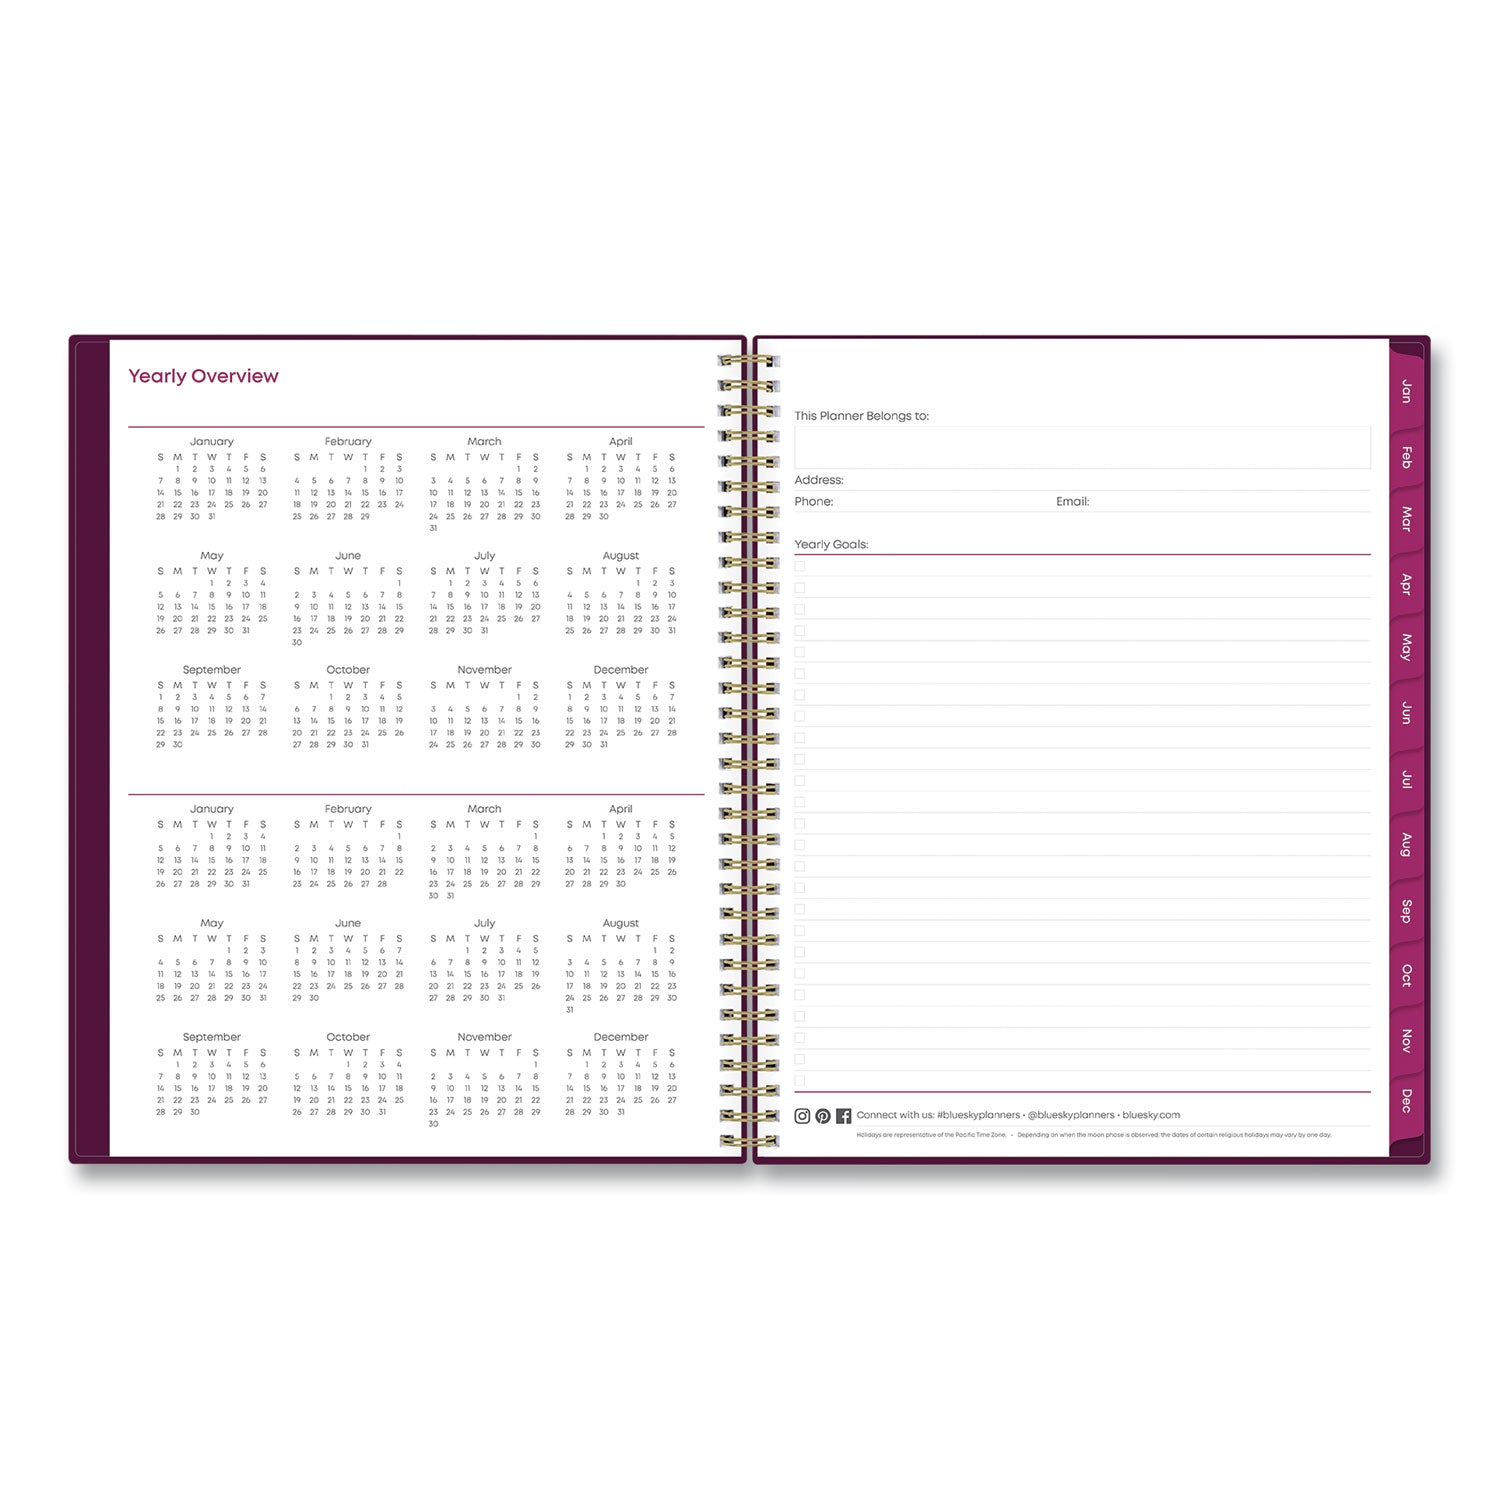 gili-weekly-monthly-planner-gili-jewel-tone-artwork-11-x-85-plum-cover-12-month-jan-to-dec-2024_bls117889 - 5